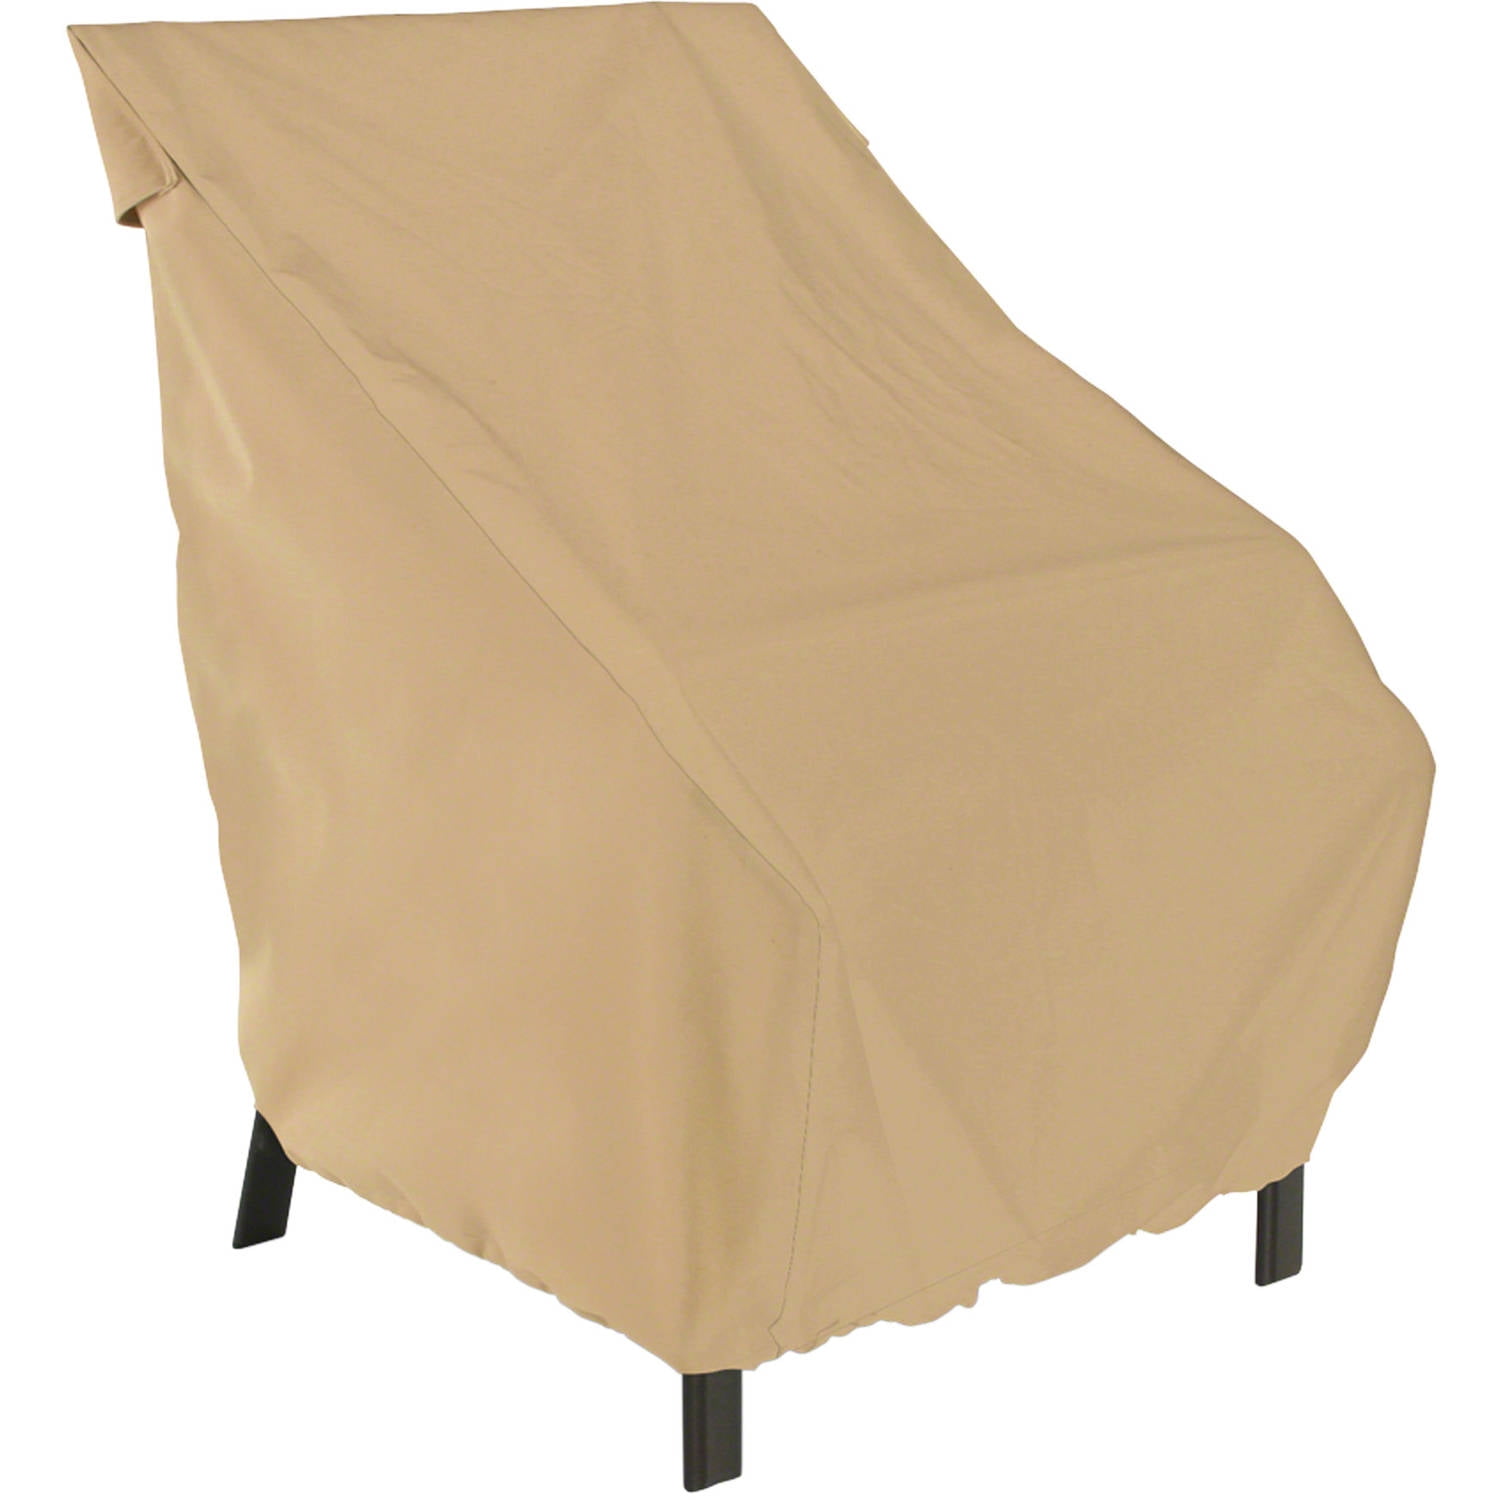 Patio Watcher Standard Patio Chair Cover Durable and Waterproof Outdoor Furniture Chair Cover,Grey 